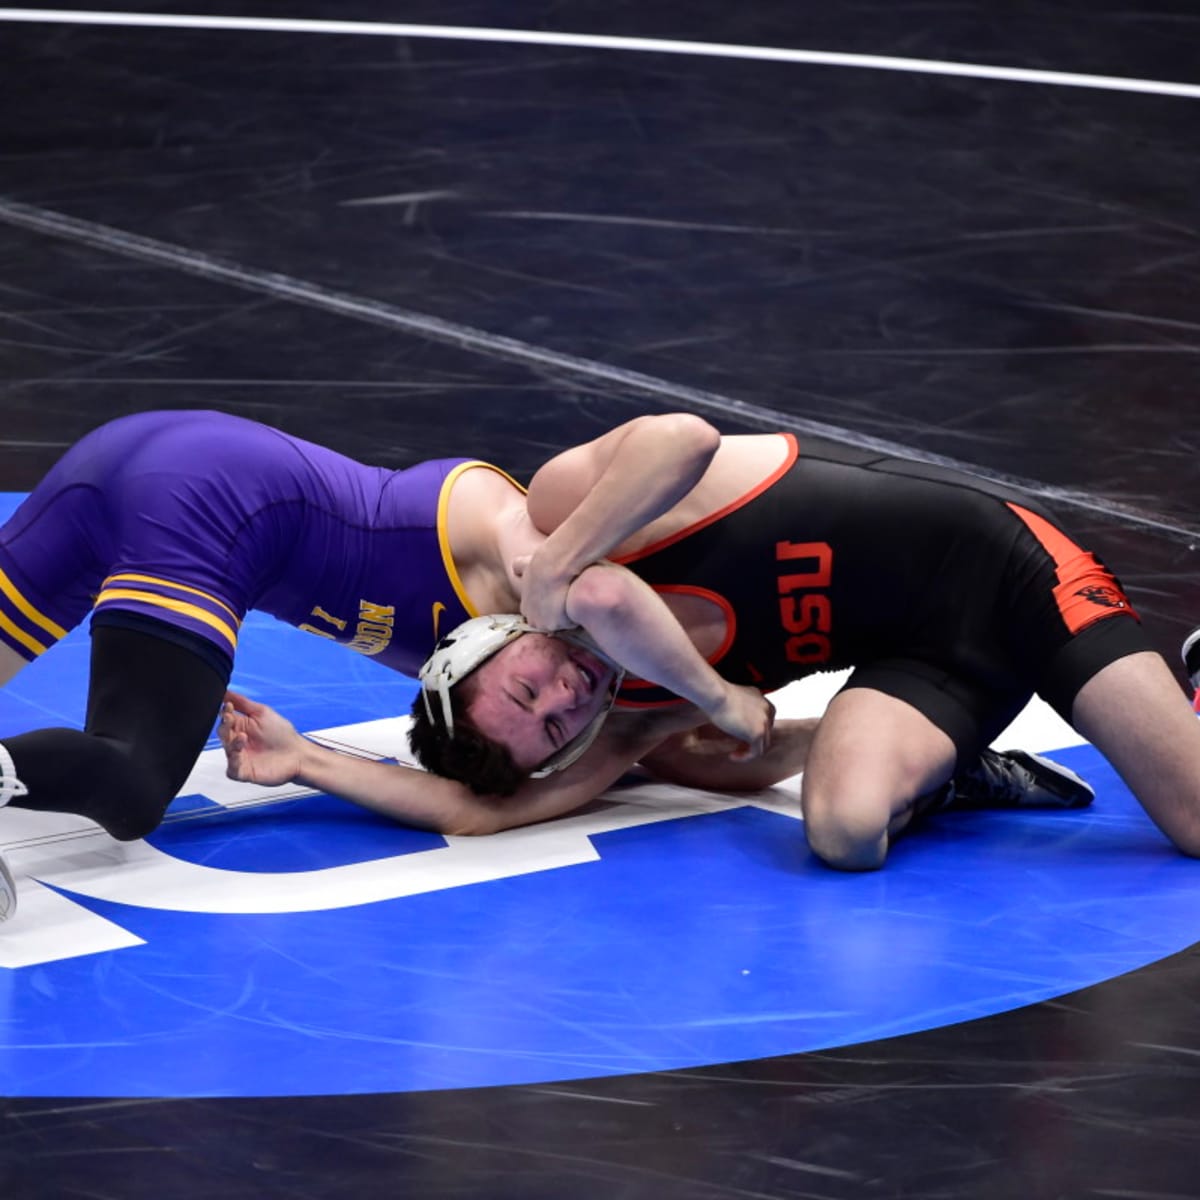 NCAA College Wrestling Championships Live Stream Watch Online, TV Channel, Start Time - How to Watch and Stream Major League and College Sports